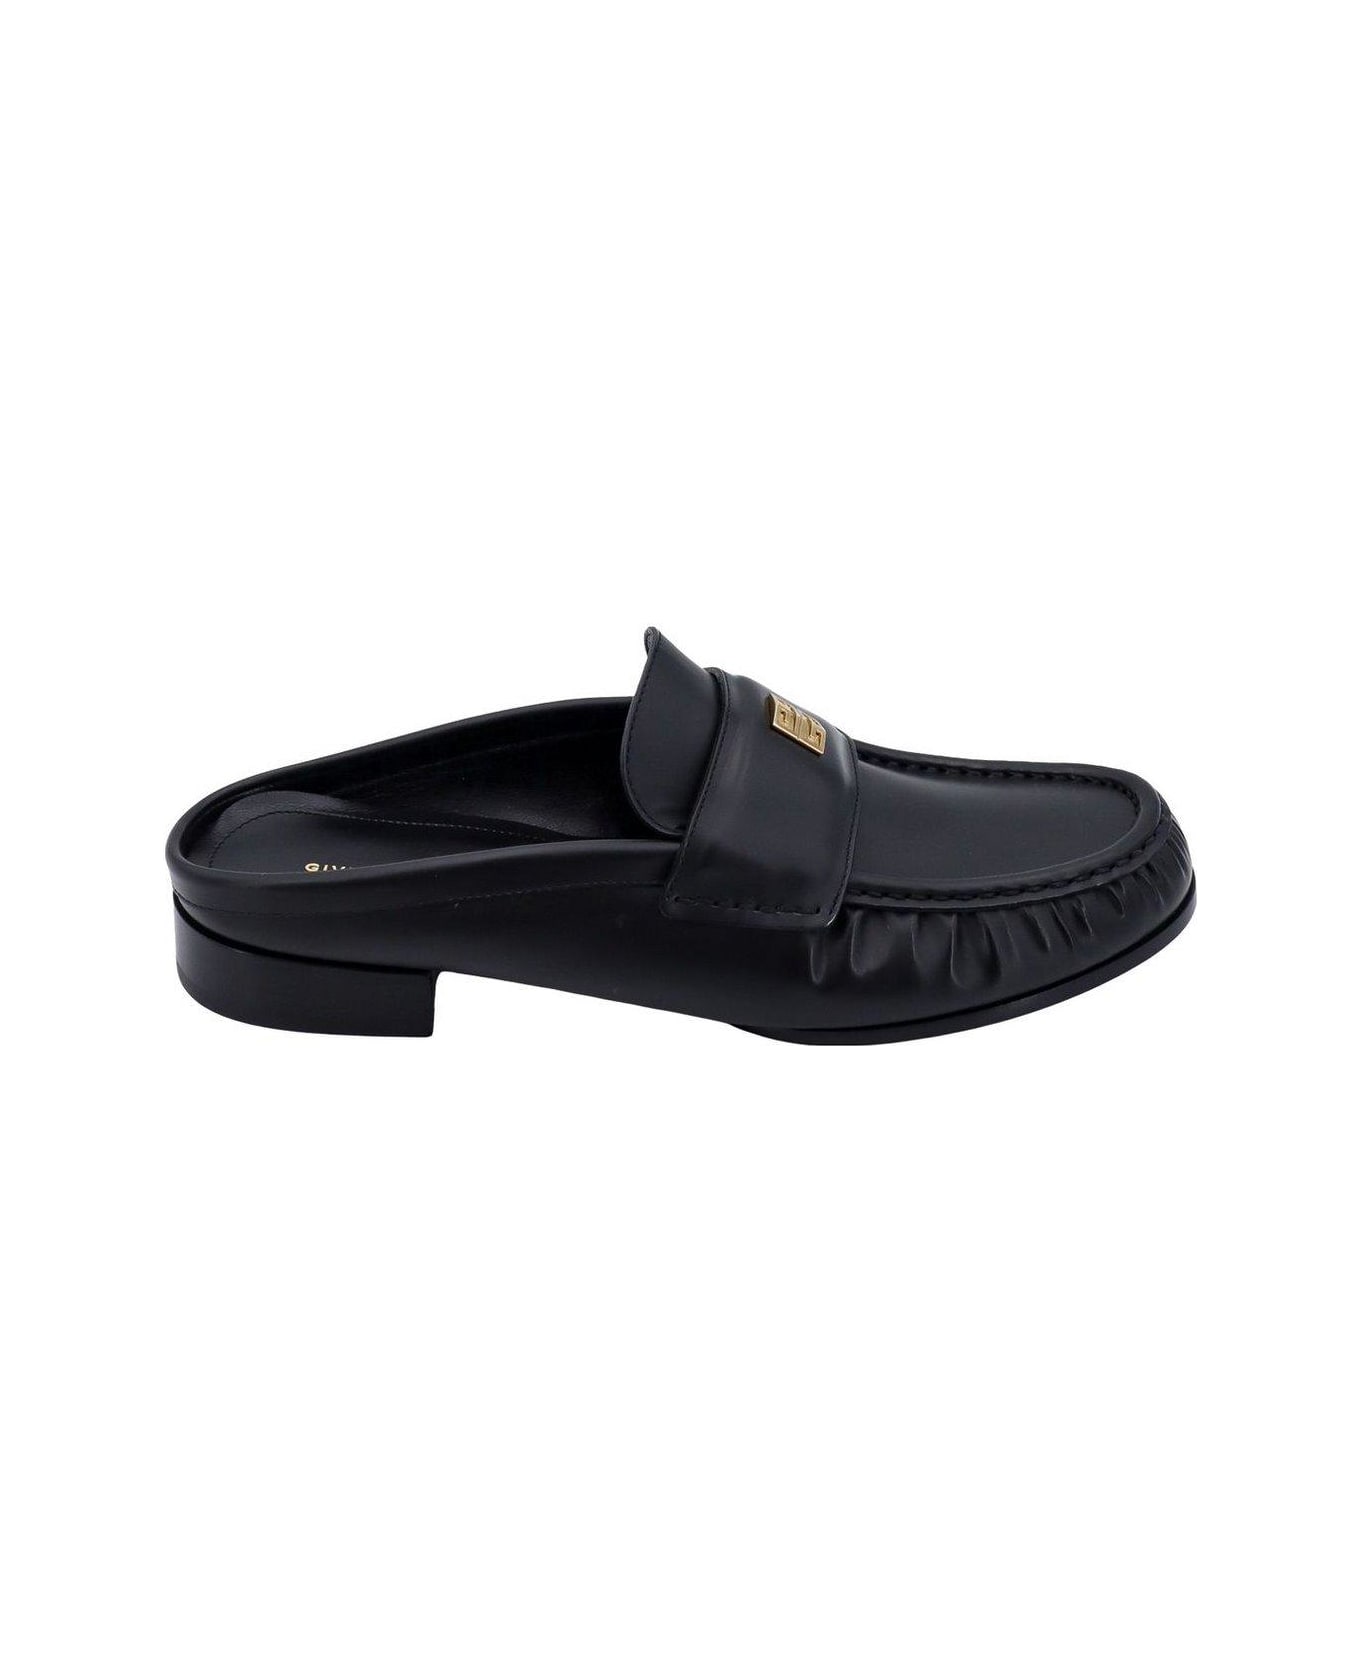 Givenchy 4g Plaque Mules - Black